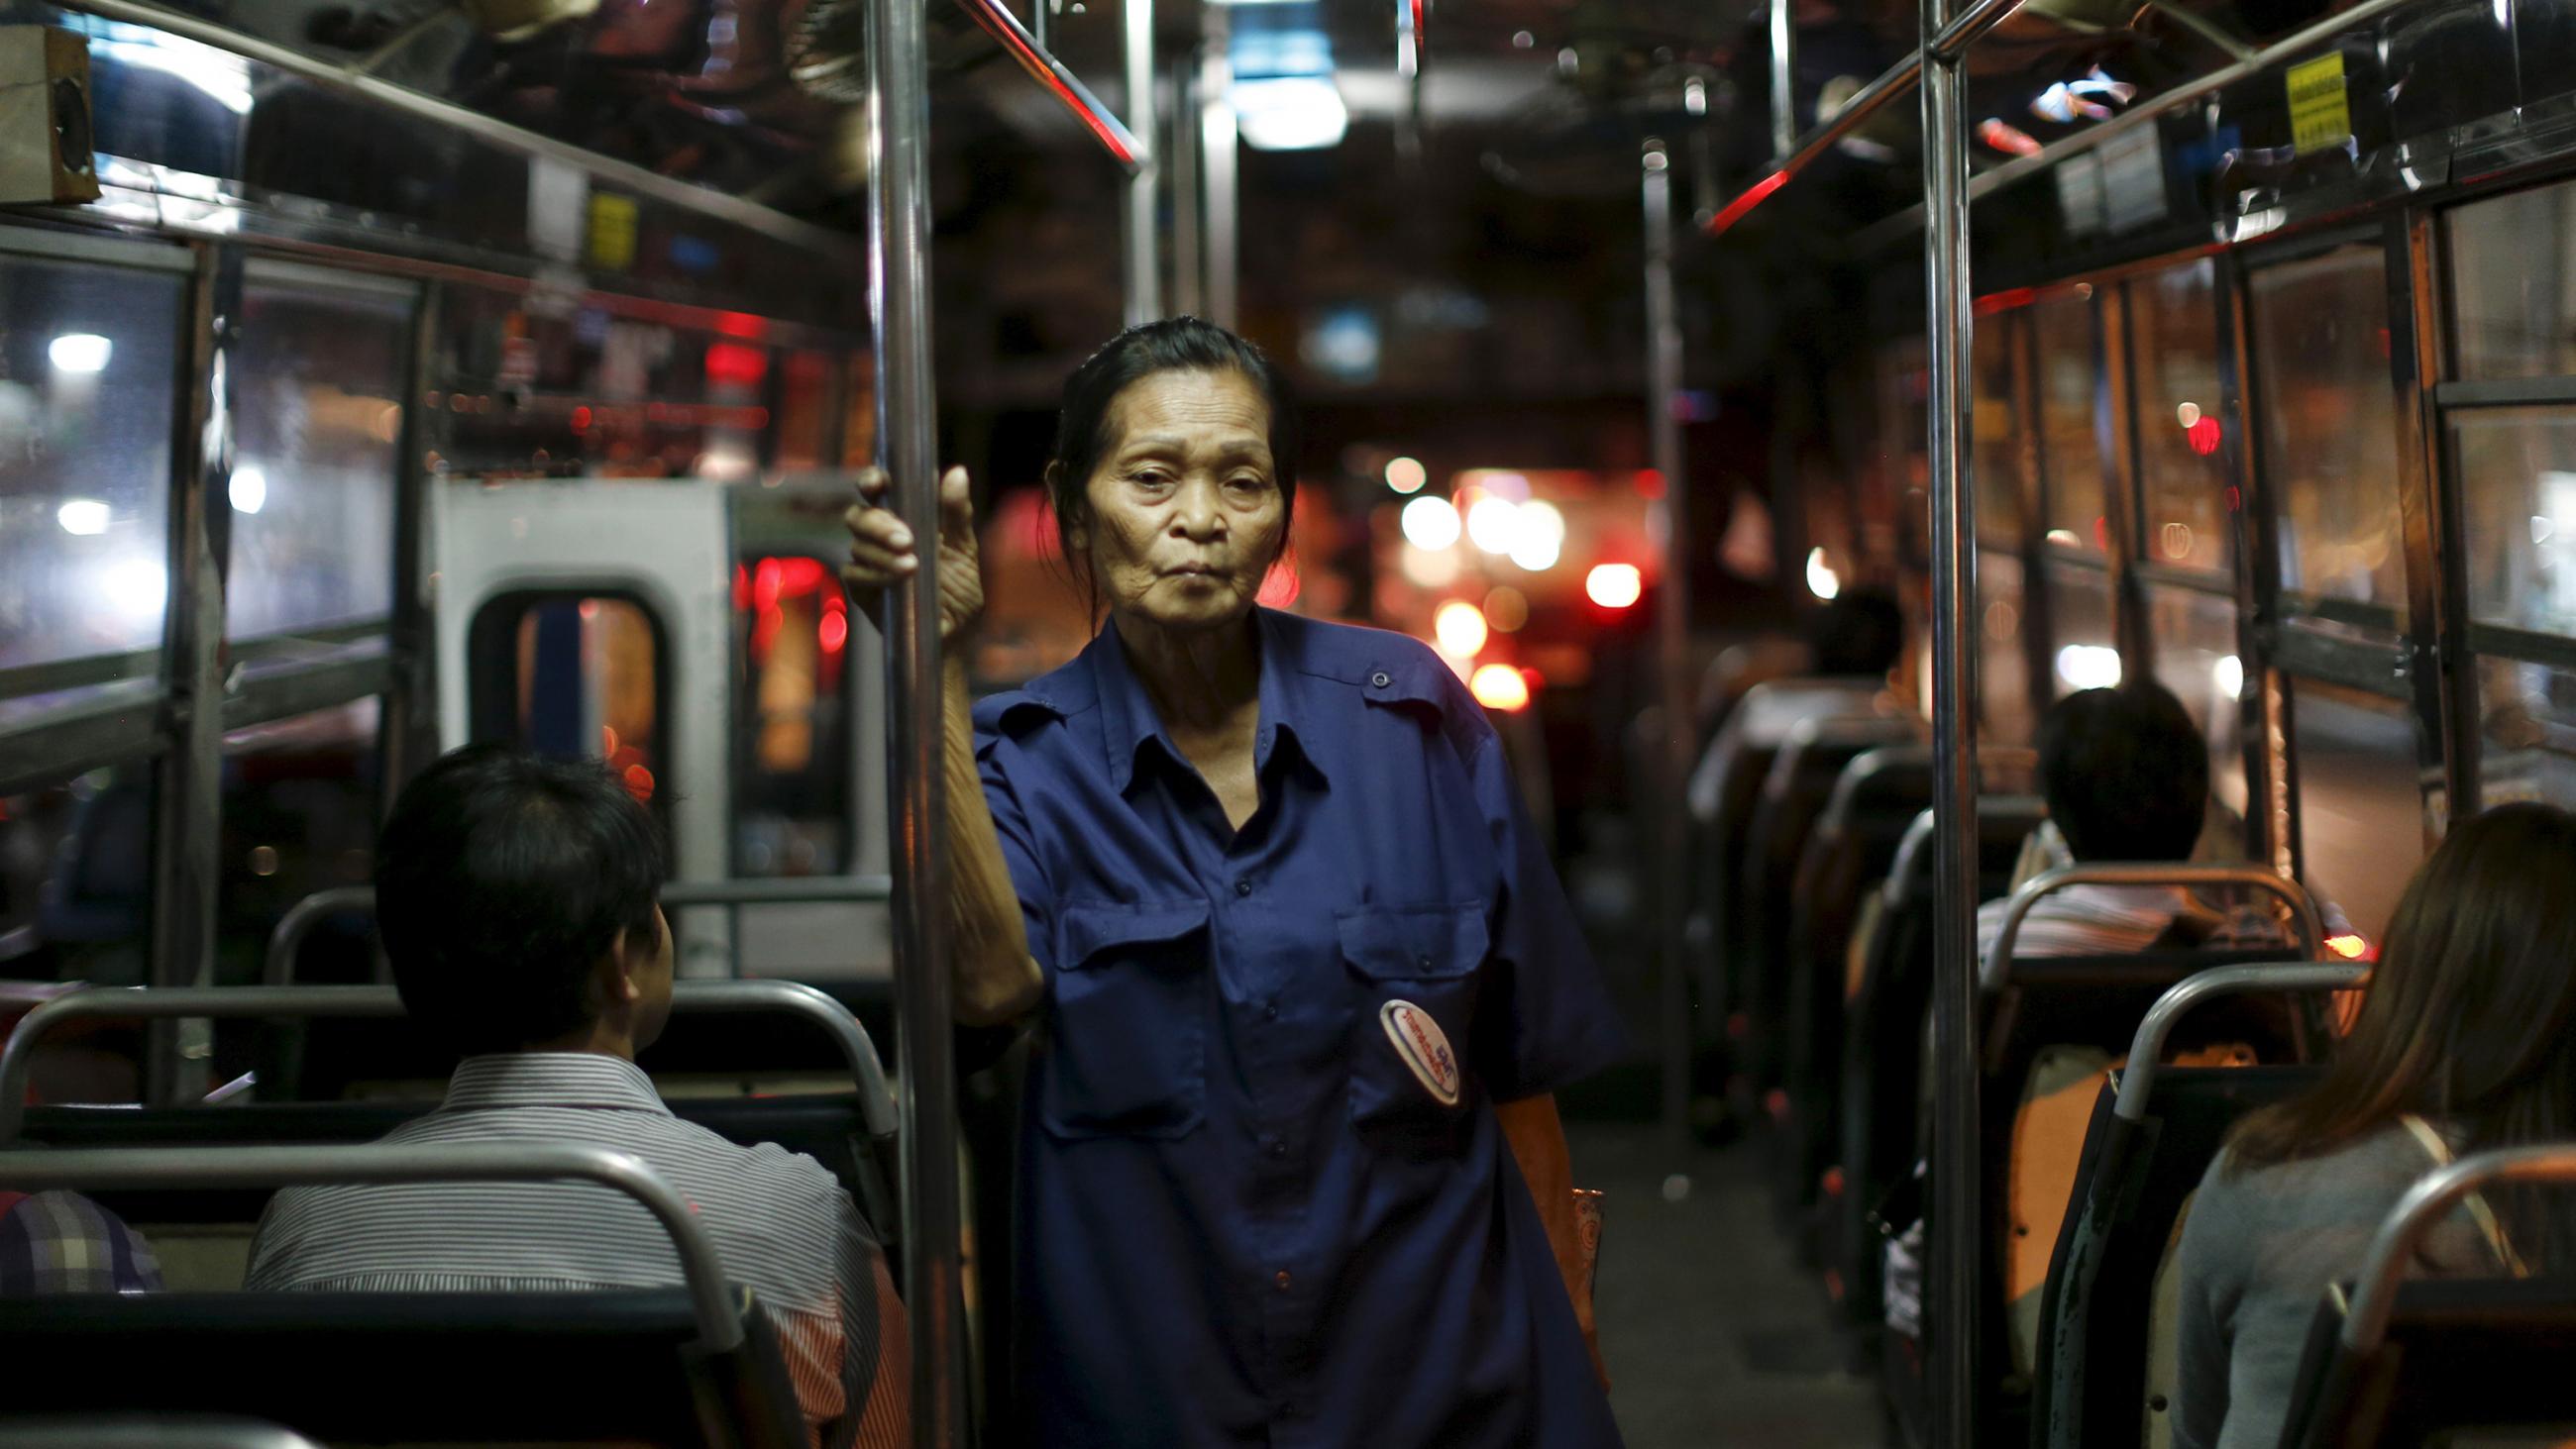 Picture shows the ticket taker standing on a bus at night, holding onto a rail. 